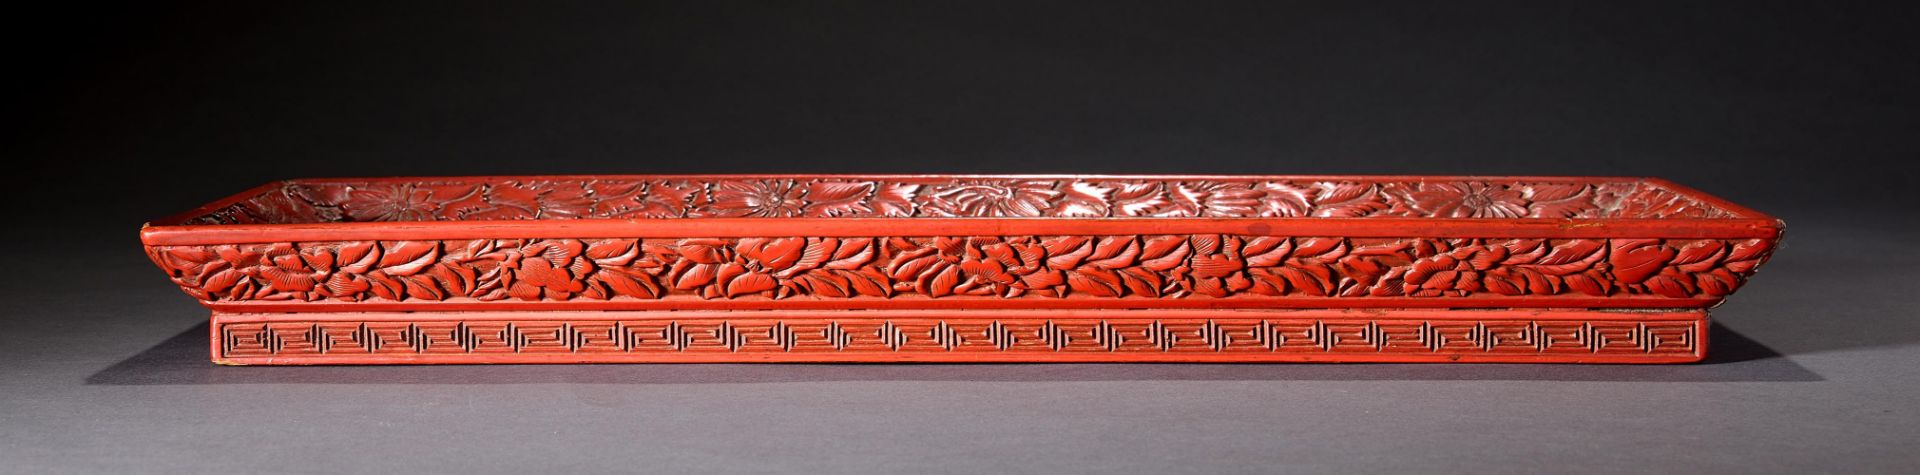 A CHINESE CARVED CINNABAR LACQUER RECTANGULAR SCROLL TRAY, QING DYNASTY - Image 2 of 3